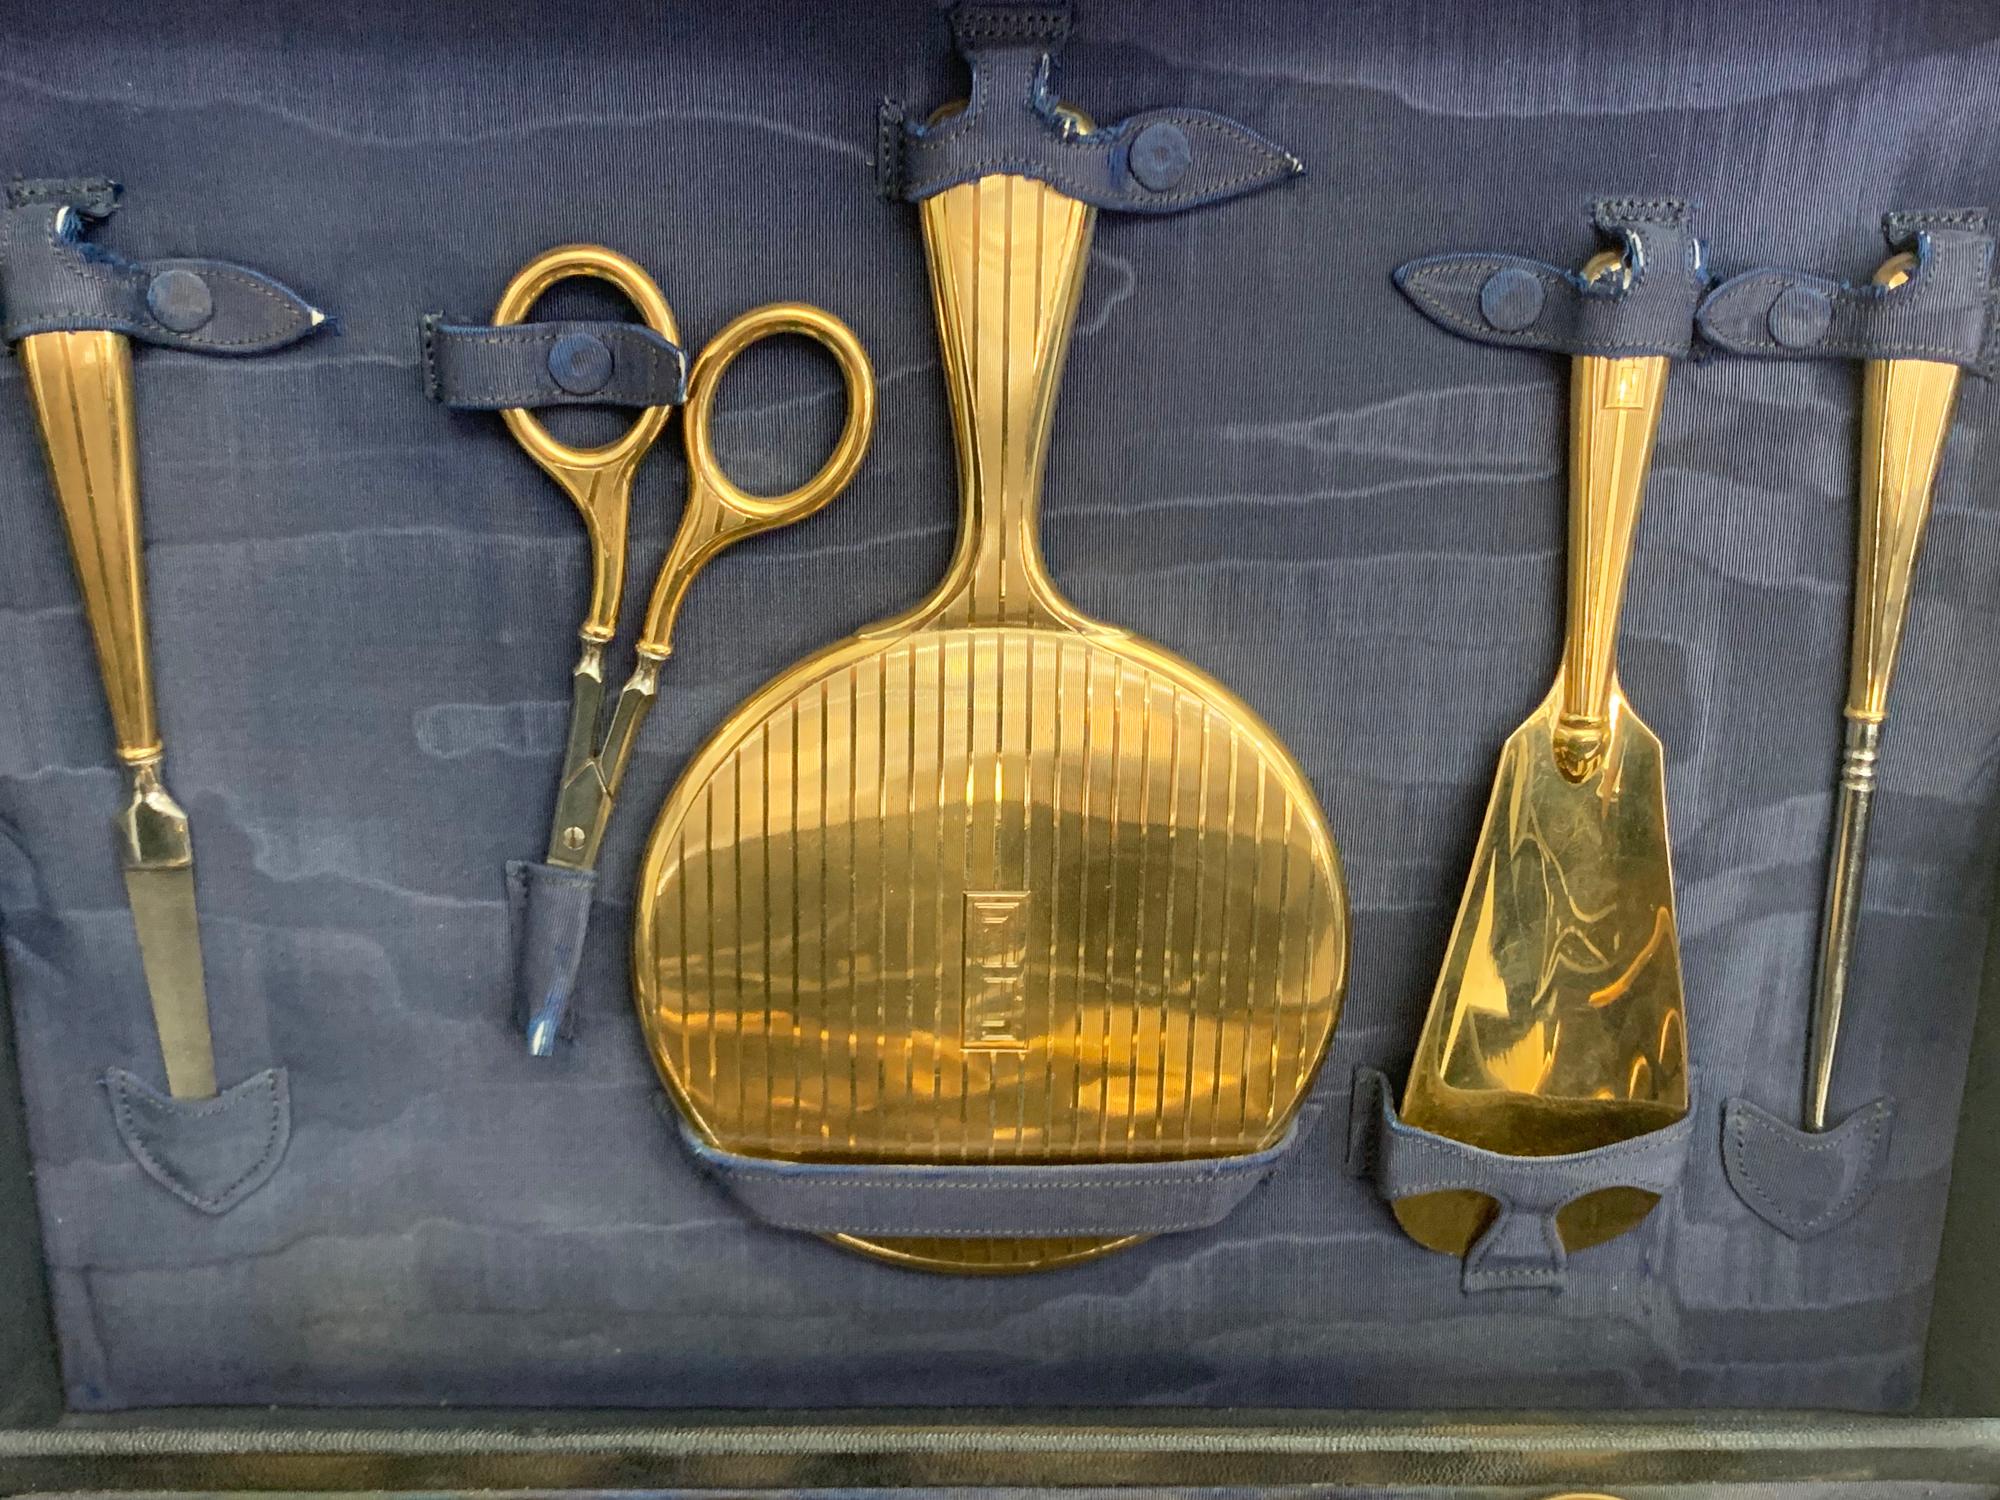 A wonderfully rare antique 14K gold dresser set contains 18 pieces including:

1 hair brush
1 hair comb
1 clothes brush
3 round gold containers
2 glass bottles
3 gold bottles
1 corsette hook
1 shoe horn
1 mirror
1 scissors
1 nail file
1 toothbrush